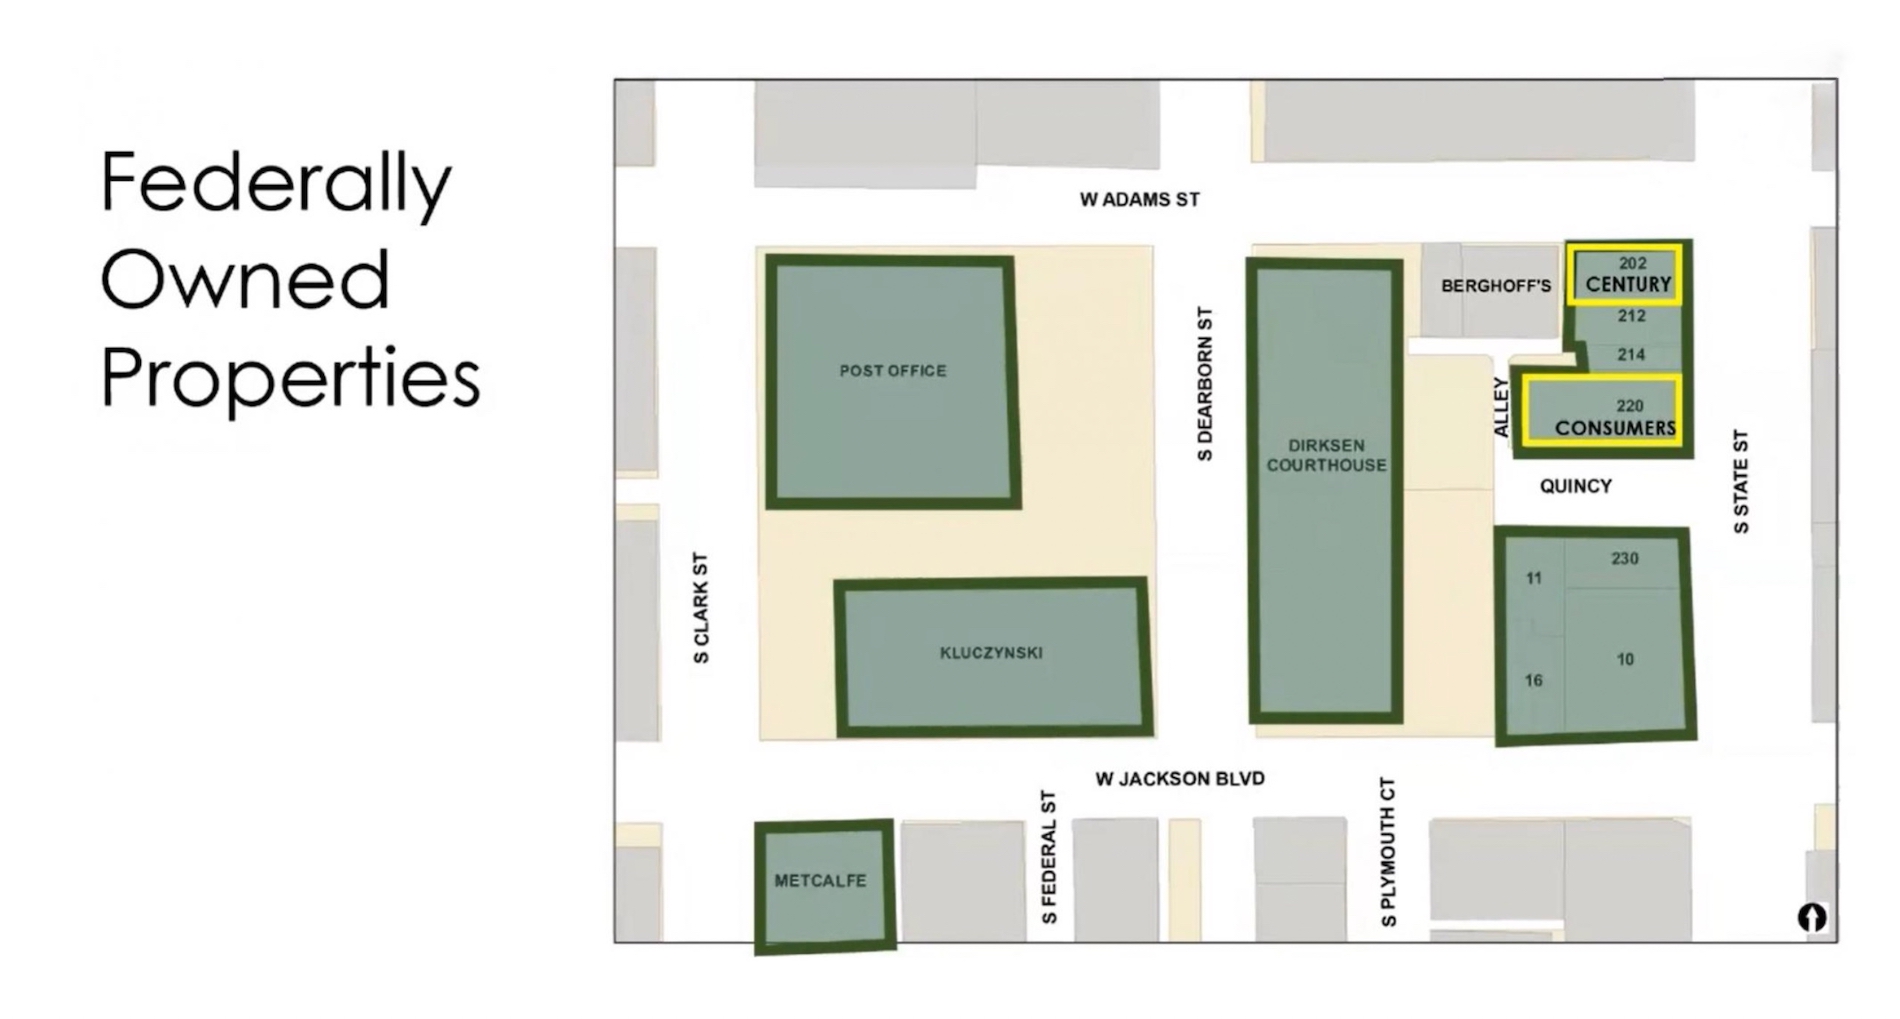 Federally owned properties (green); 202 and 220 S State Street outlined in yellow